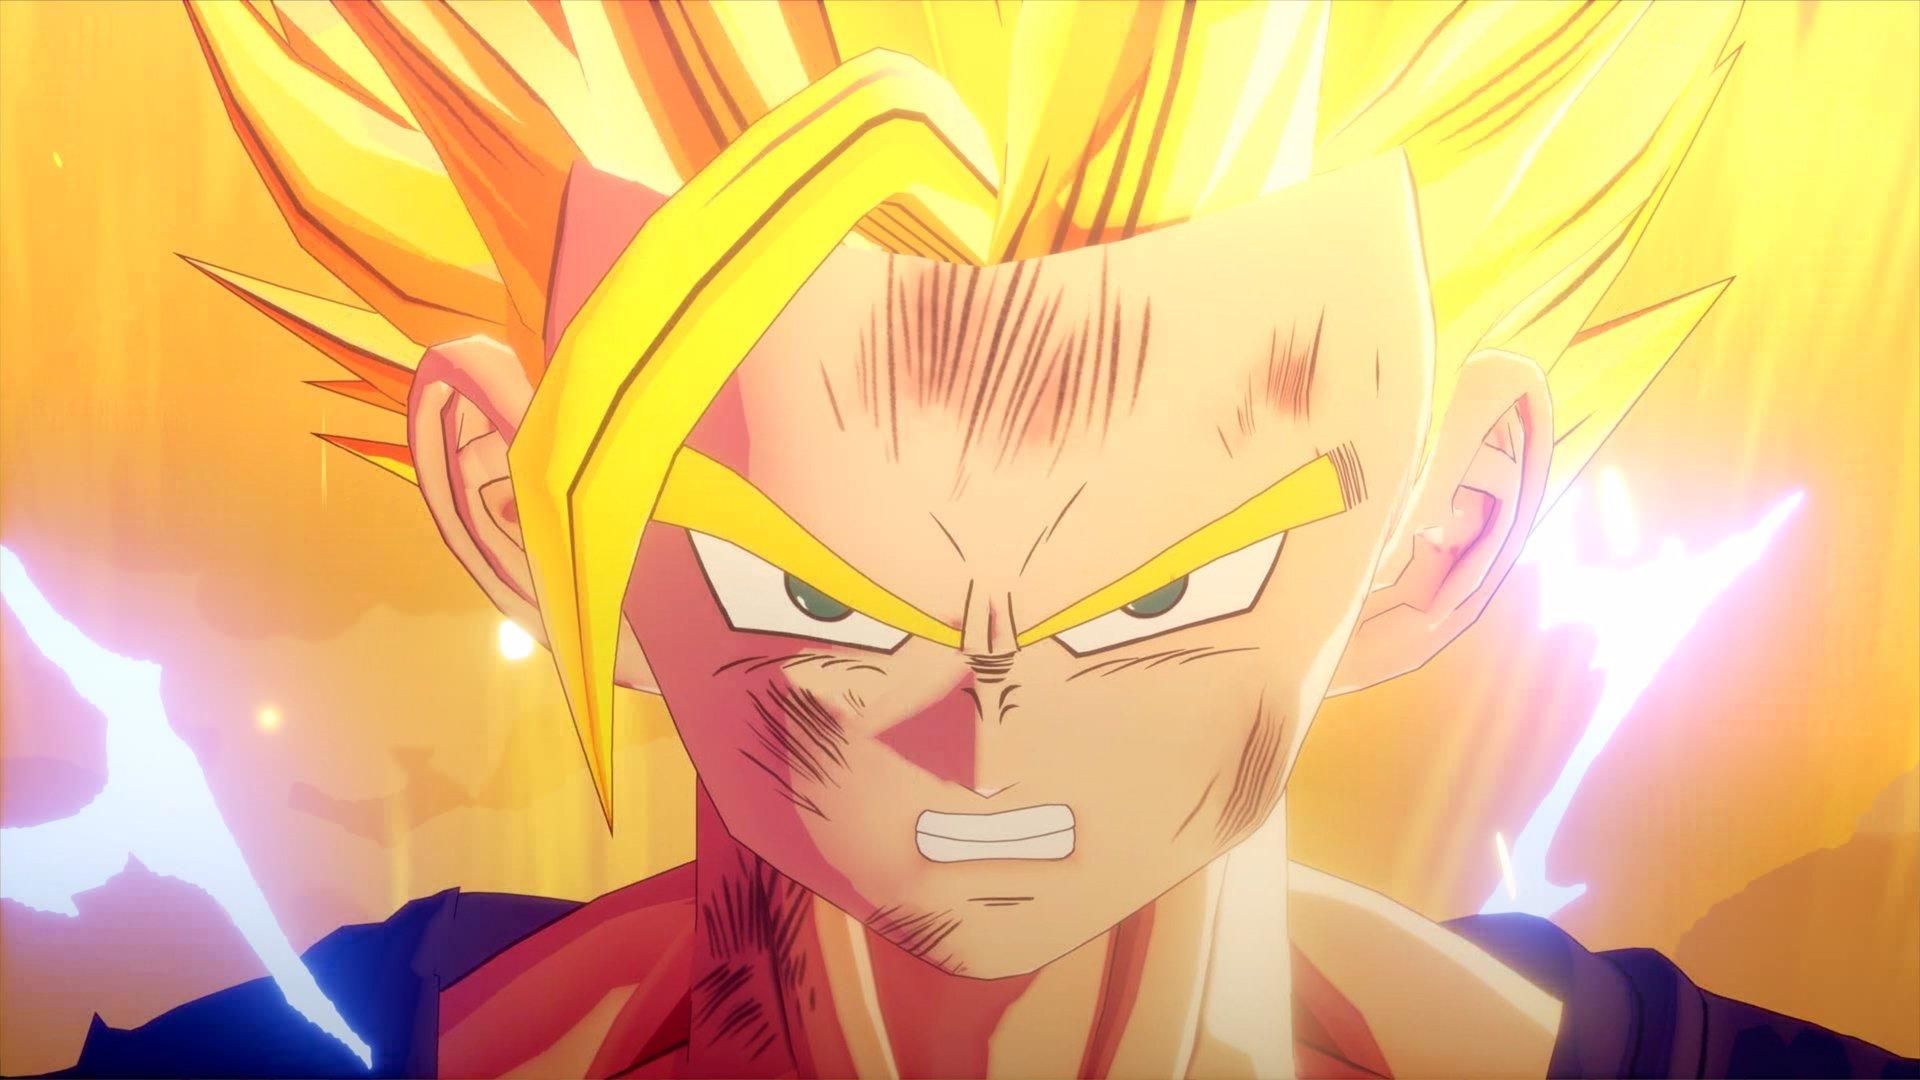 New Image for Dragon Ball Z: Kakarot Show off Iconic